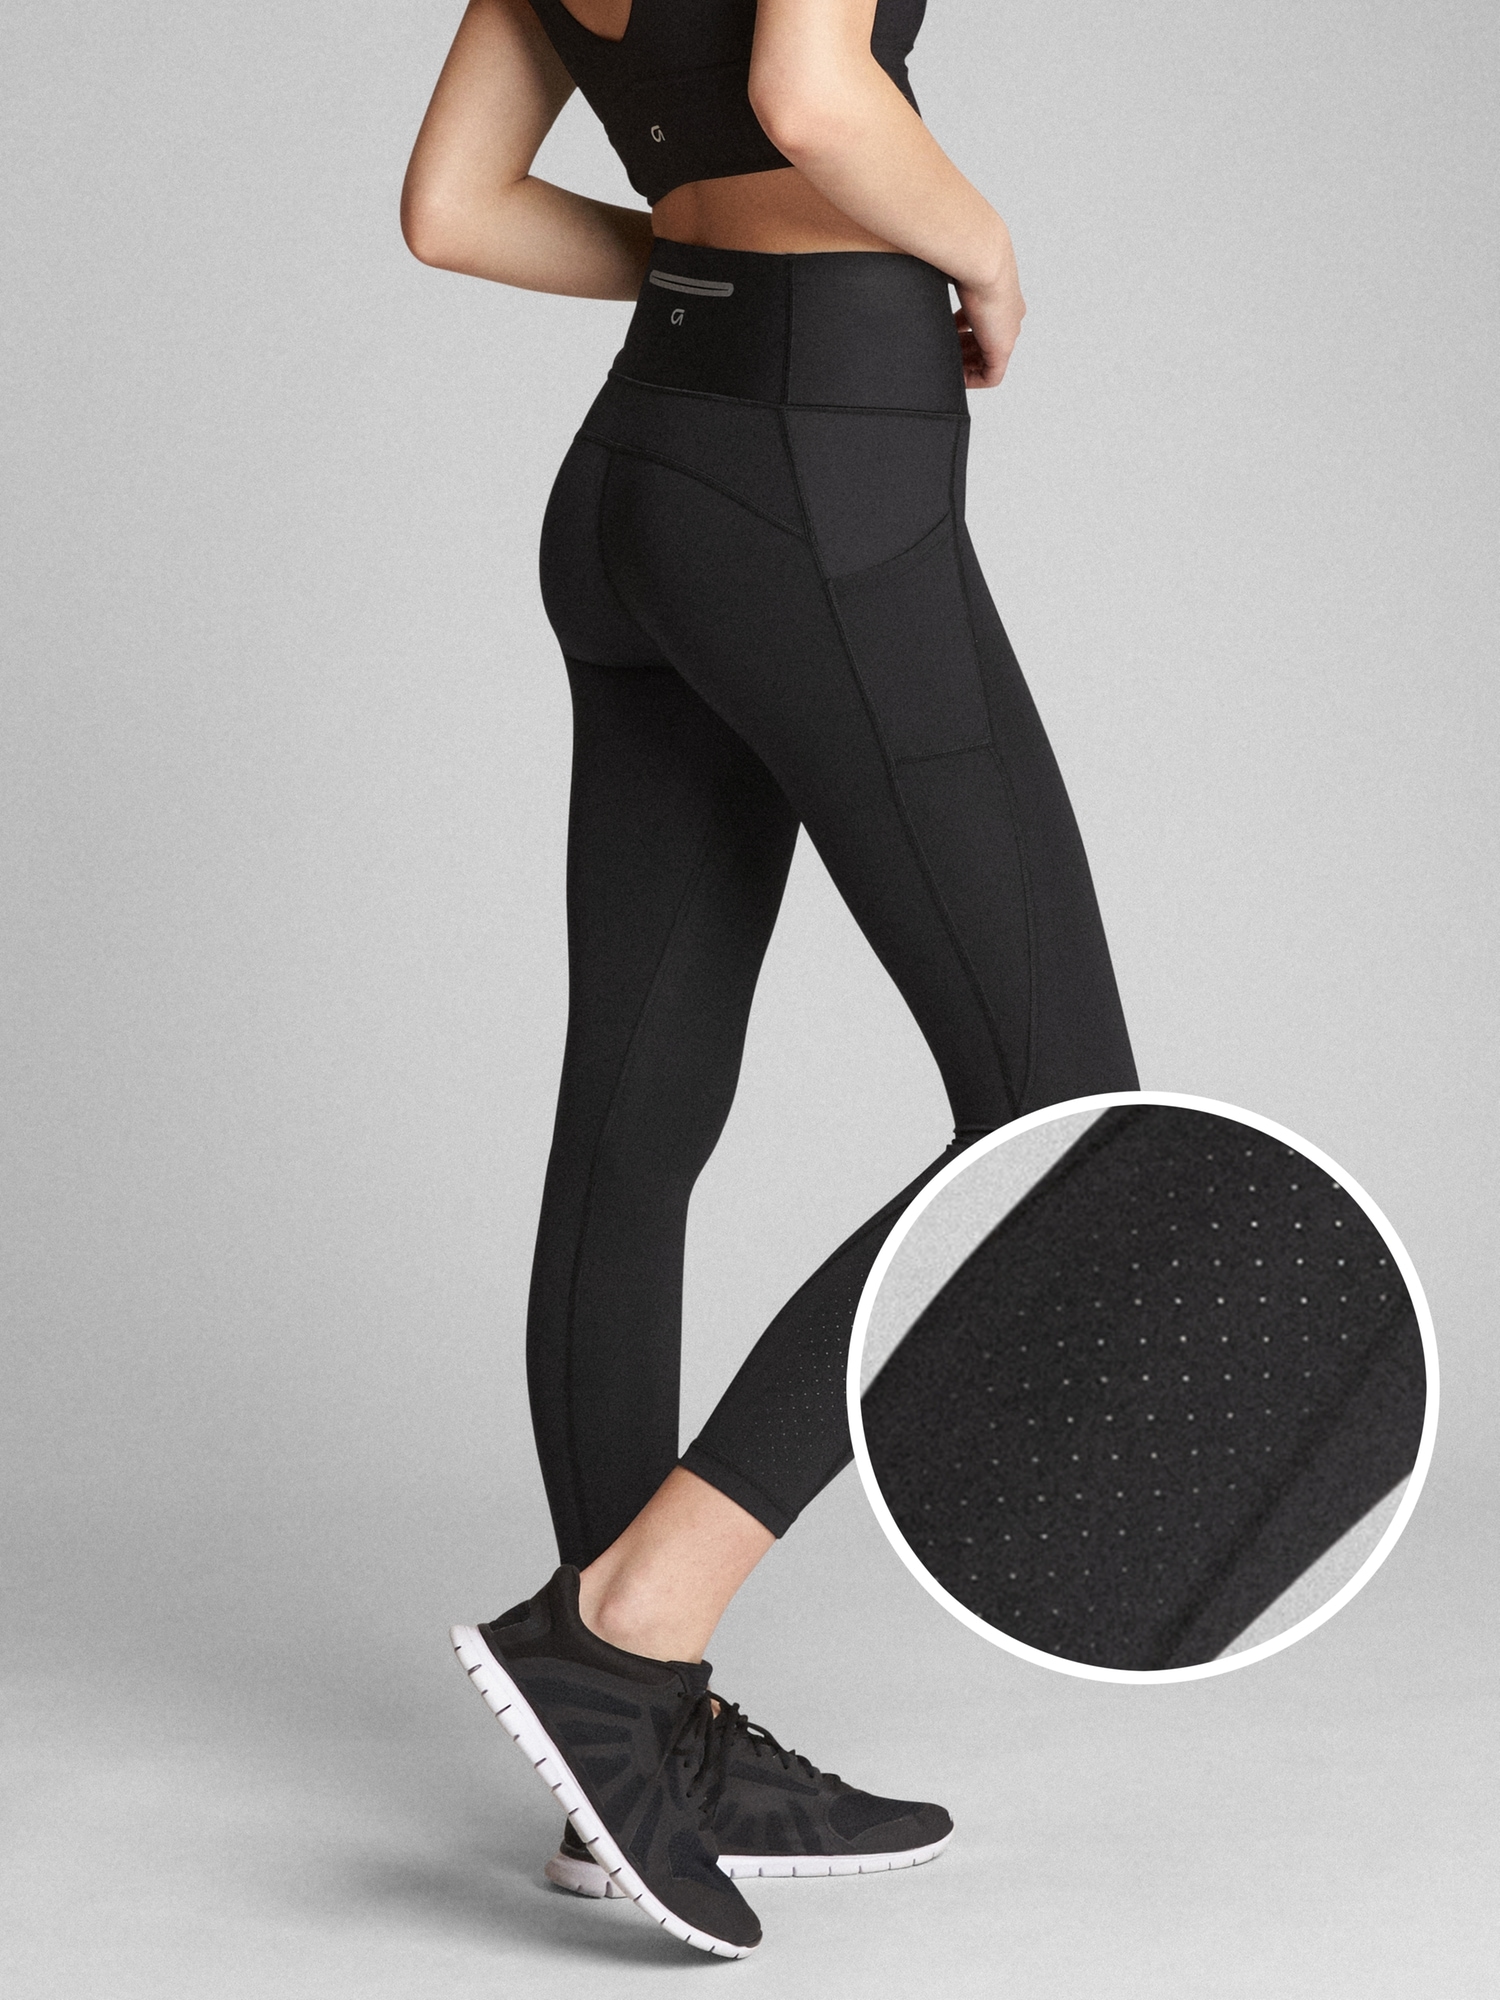 Sculpt and Shape in Style with GapFit Gfast Compression Leggings